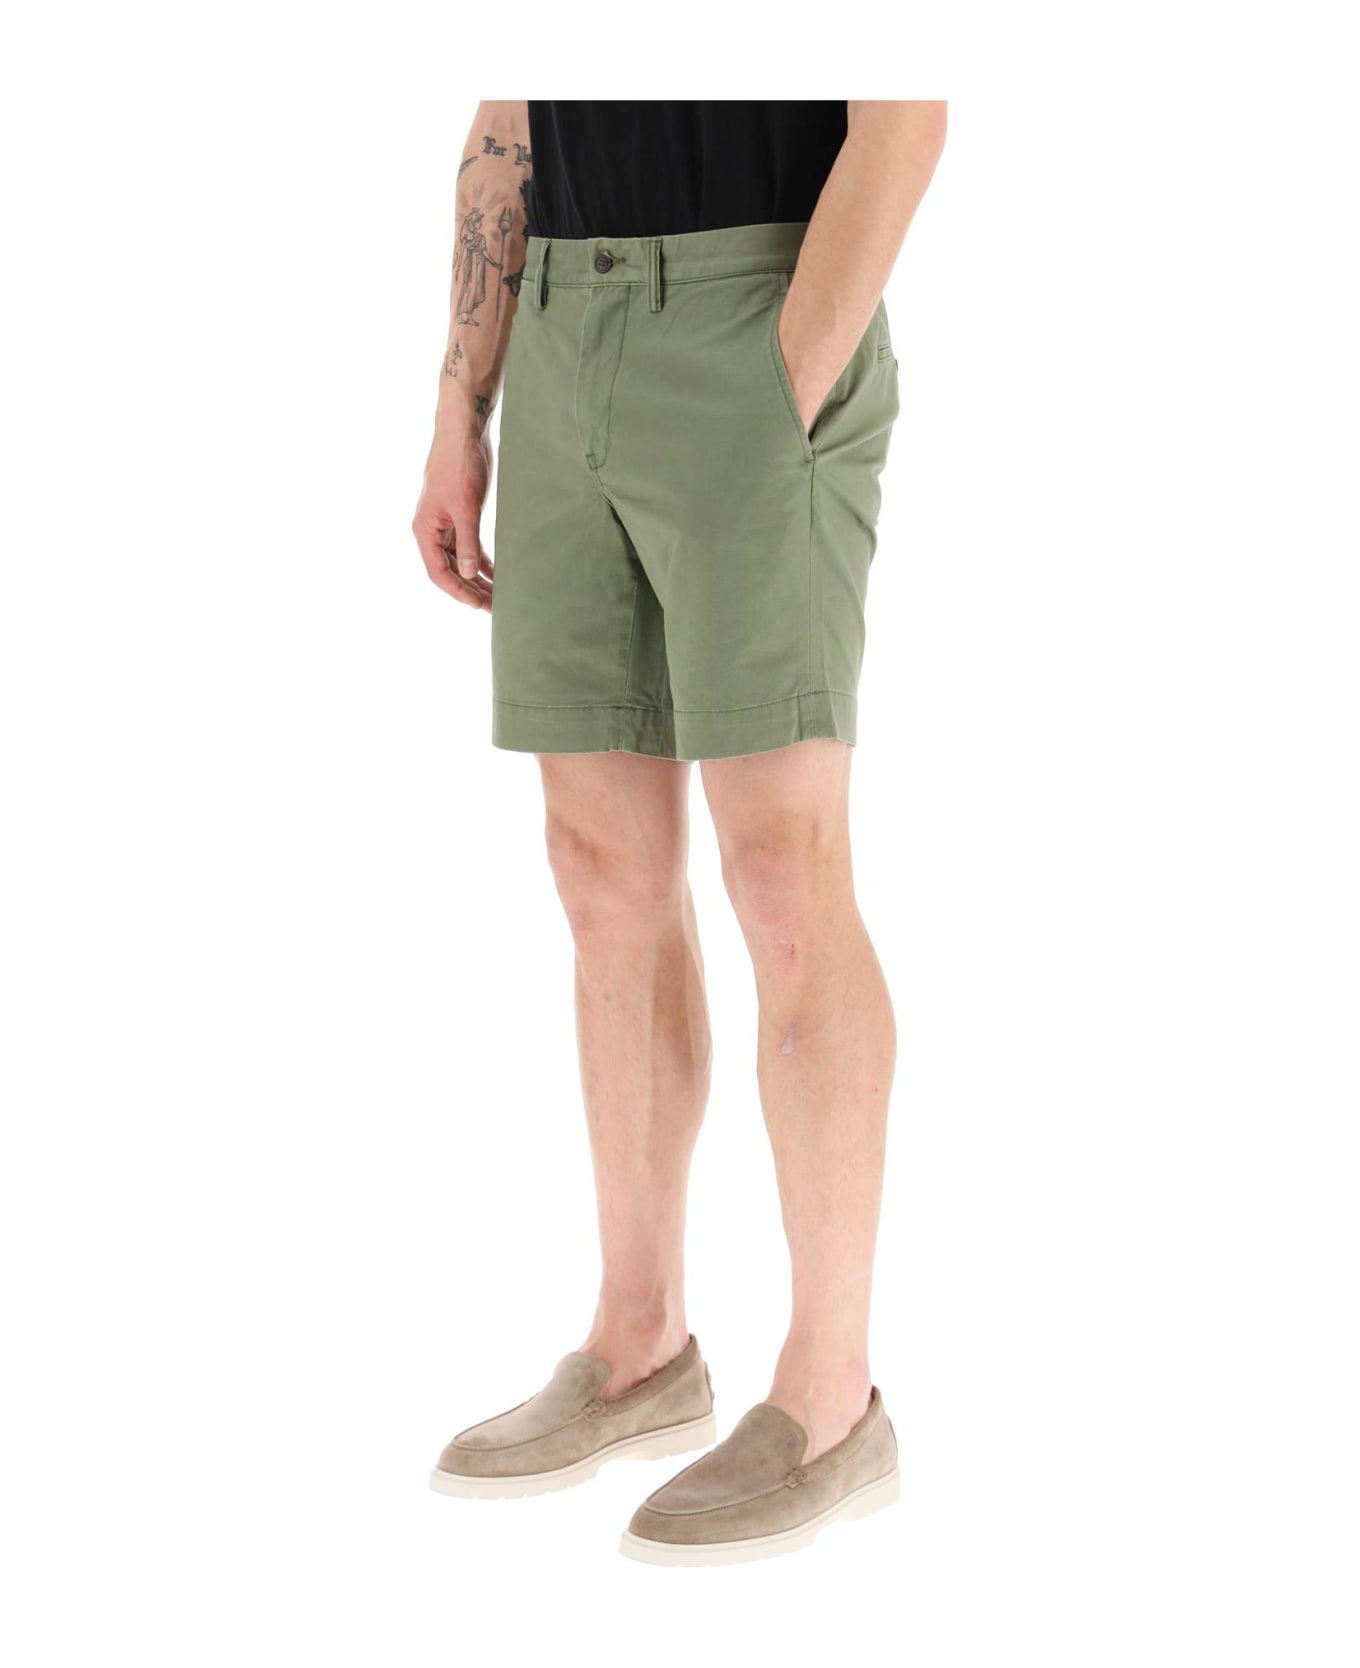 Polo Ralph Lauren Stretch Chino Shorts - ARMY OLIVE (Green)